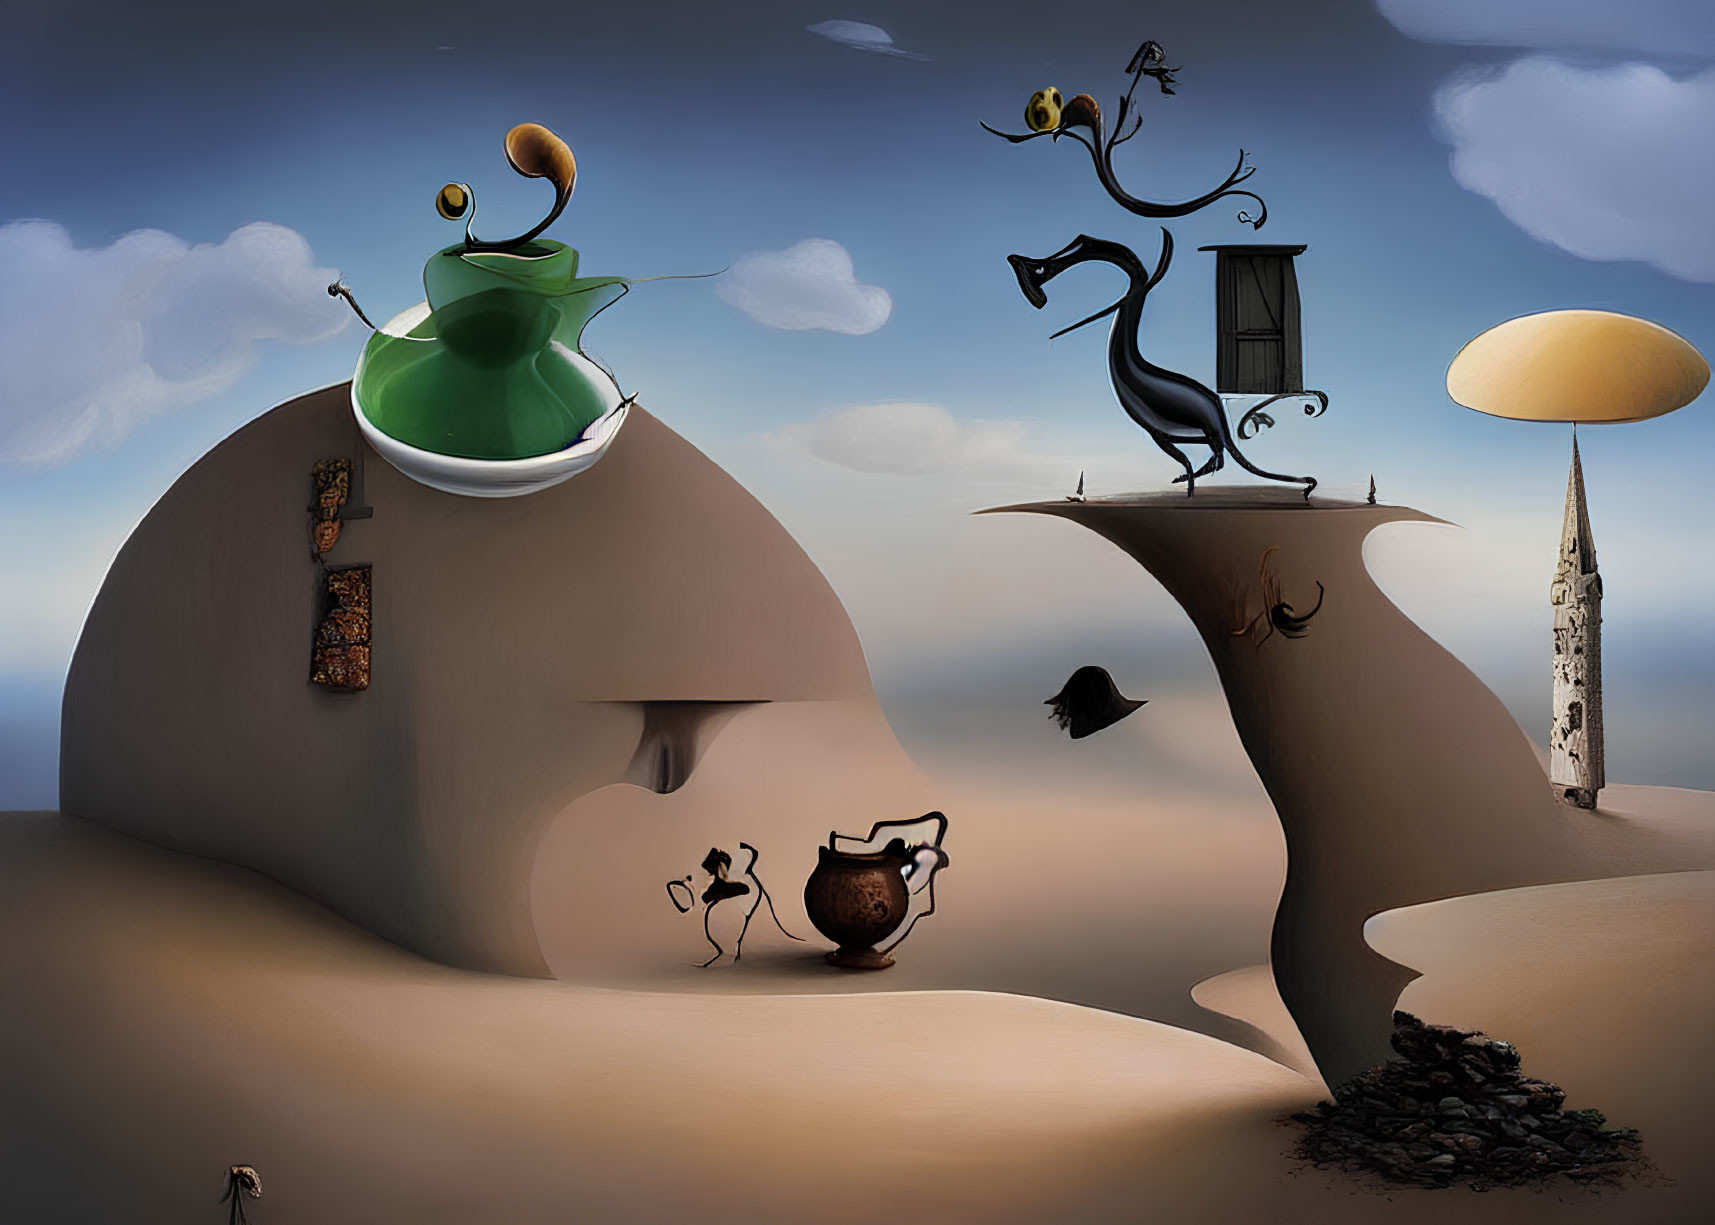 Surreal landscape featuring anthropomorphic hills and whimsical structures